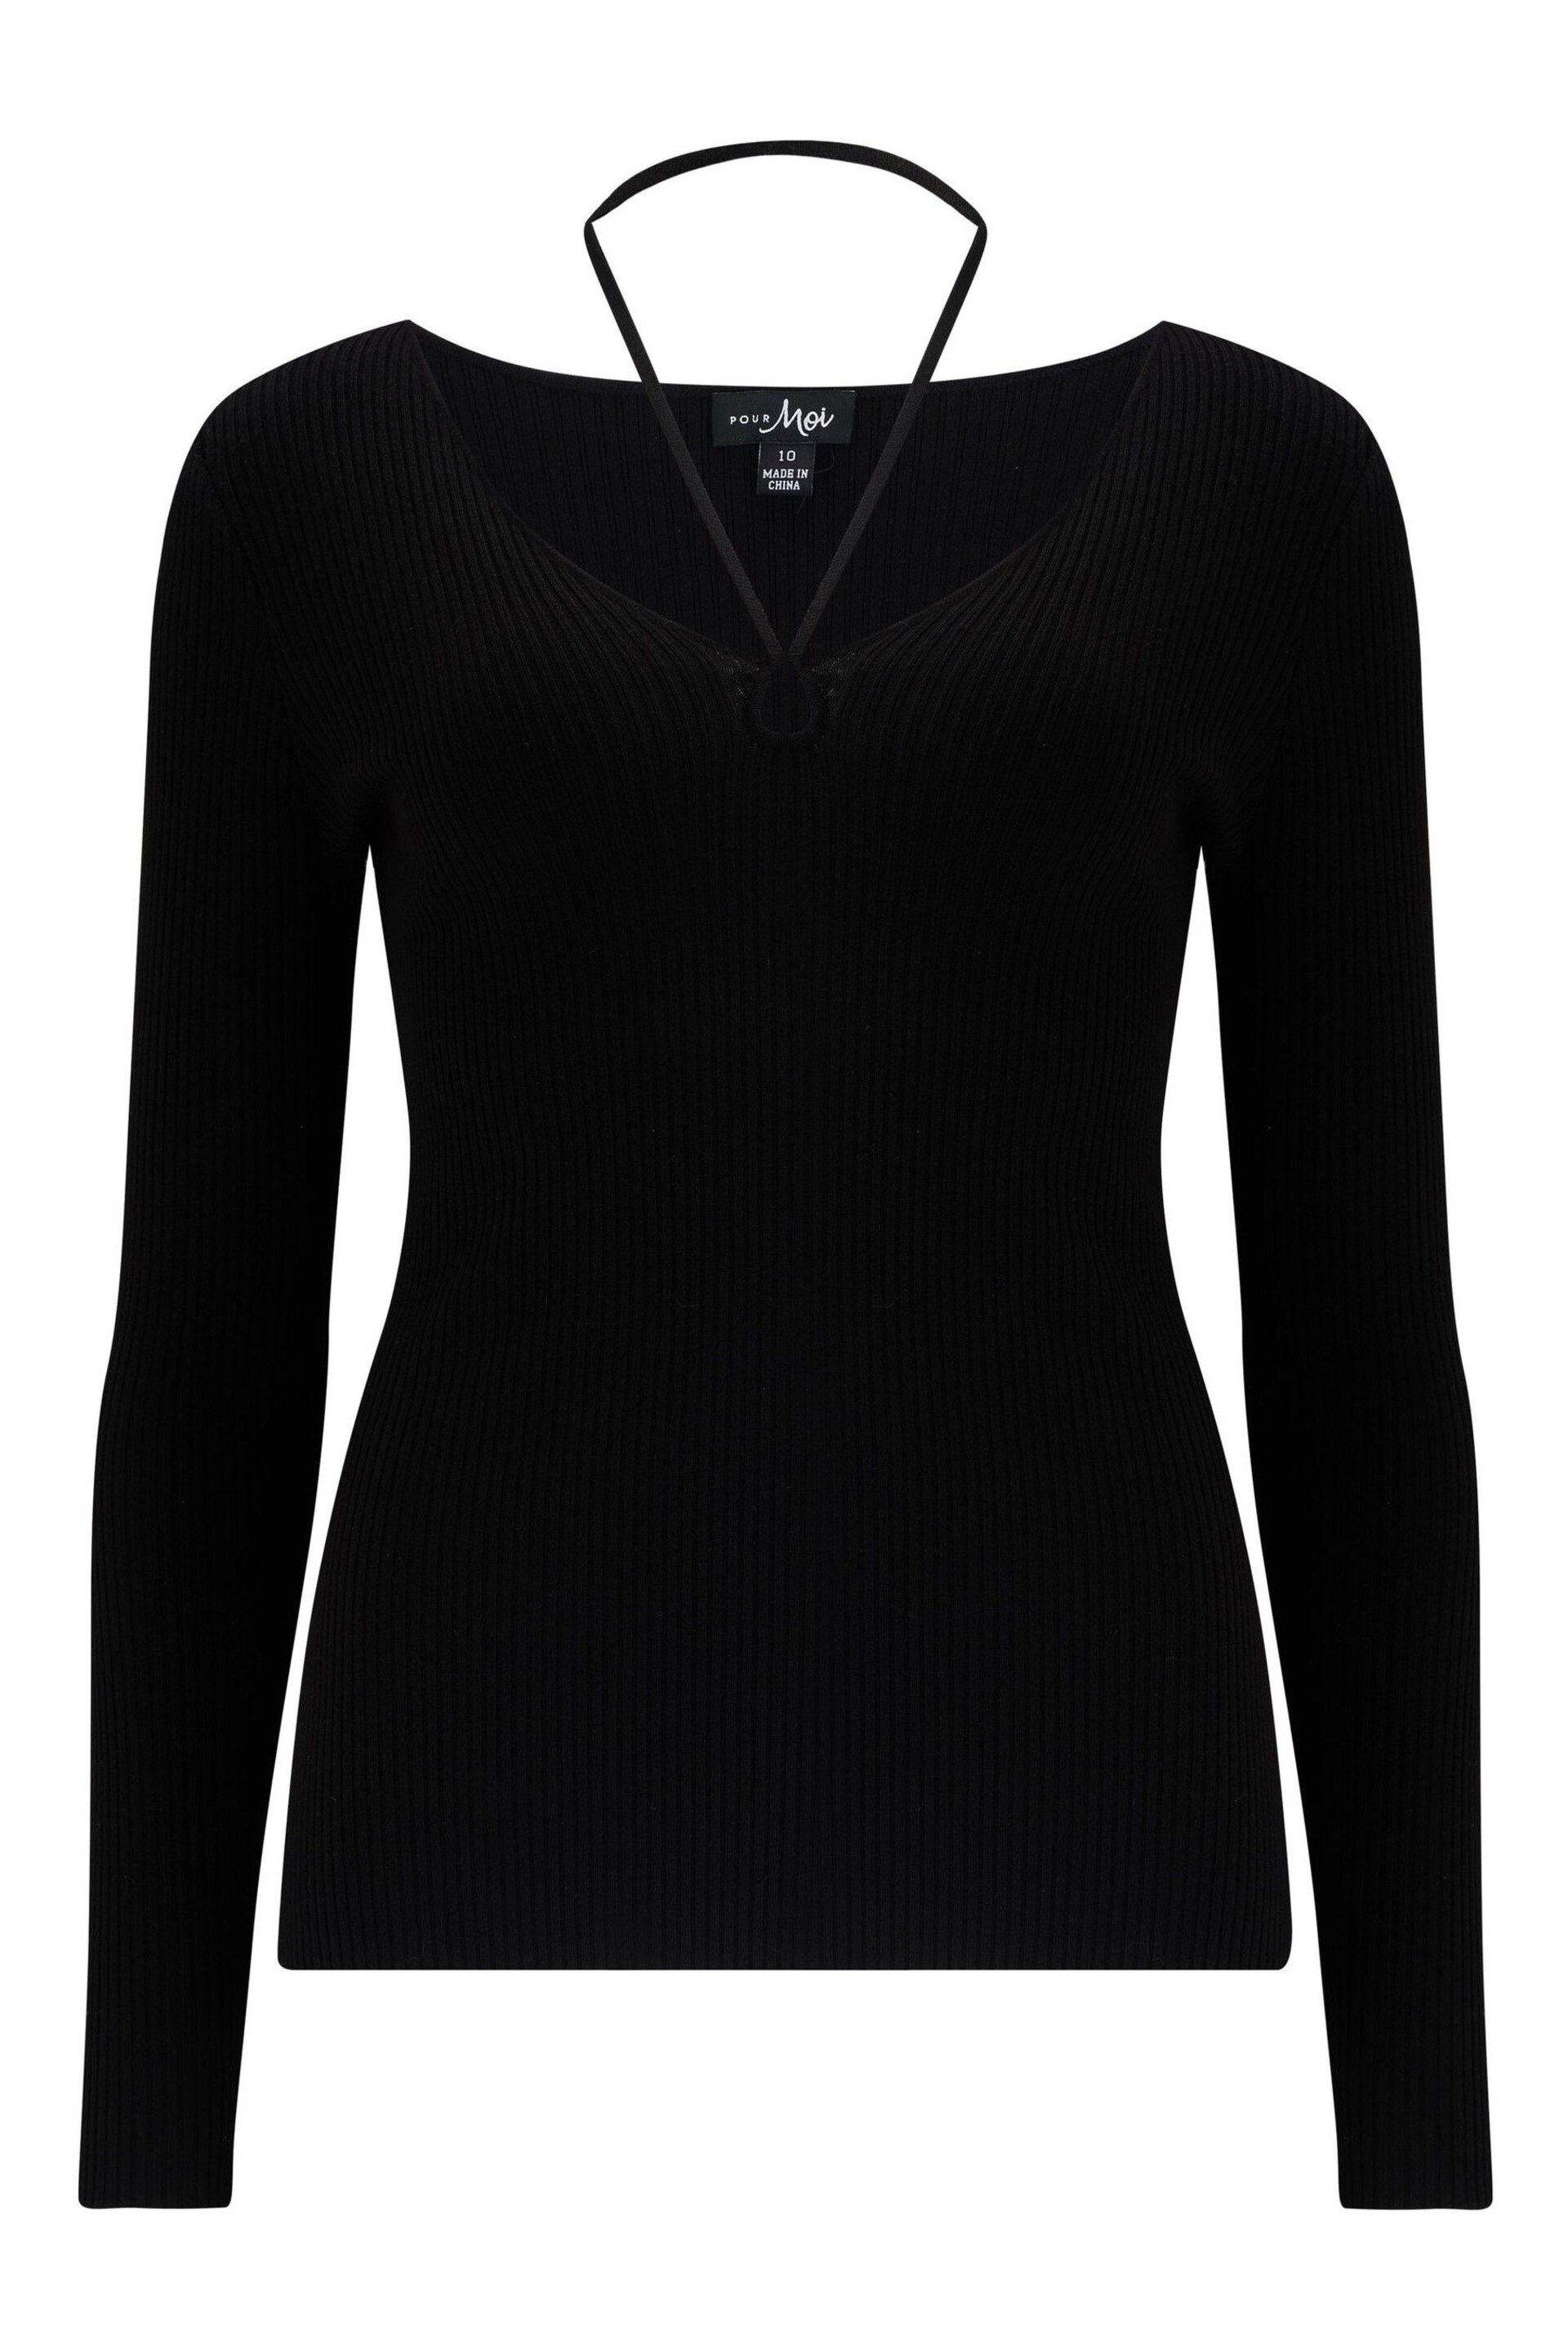 Pour Moi Black Susie Keyhole Rib Knit Top with LENZING™ ECOVERO™ Viscose - Image 3 of 4